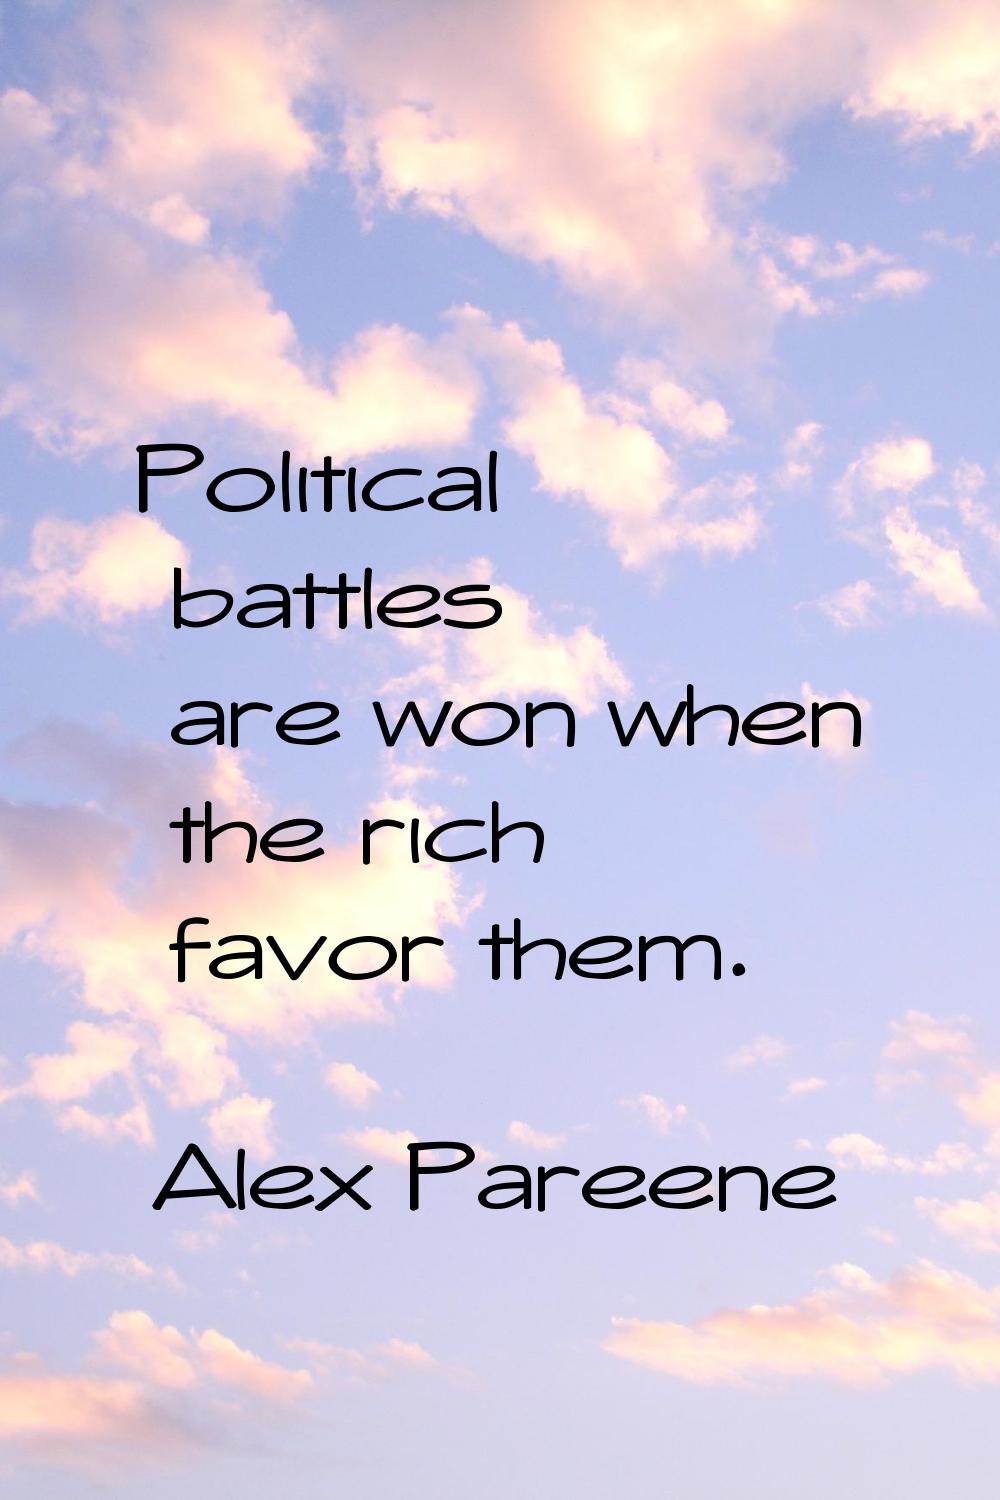 Political battles are won when the rich favor them.